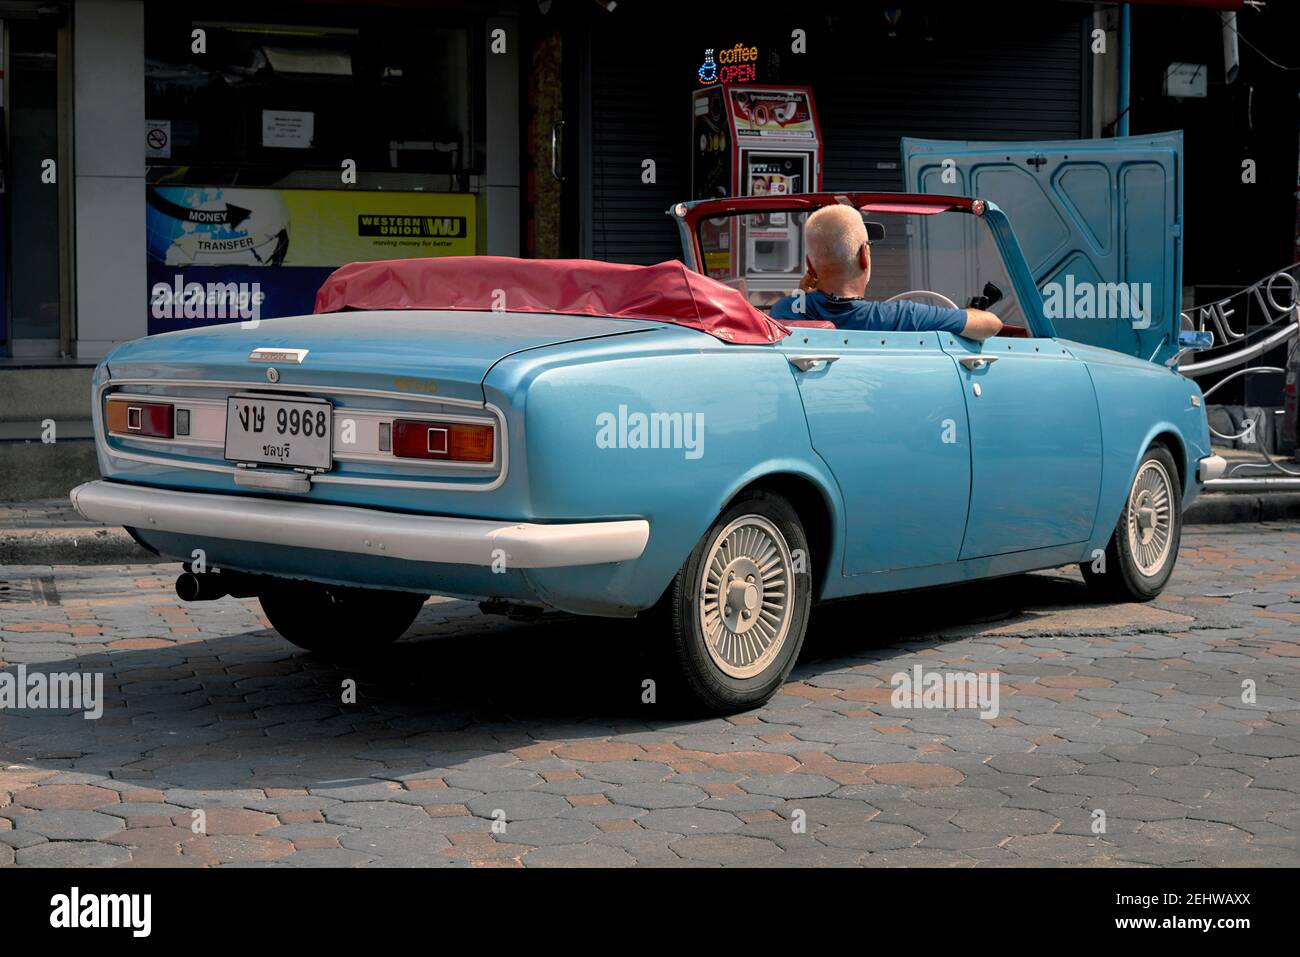 Toyota Corona convertible.  Rare convertible version of a vintage 1960s 4 door drop head car in sky blue with red interior. Stock Photo